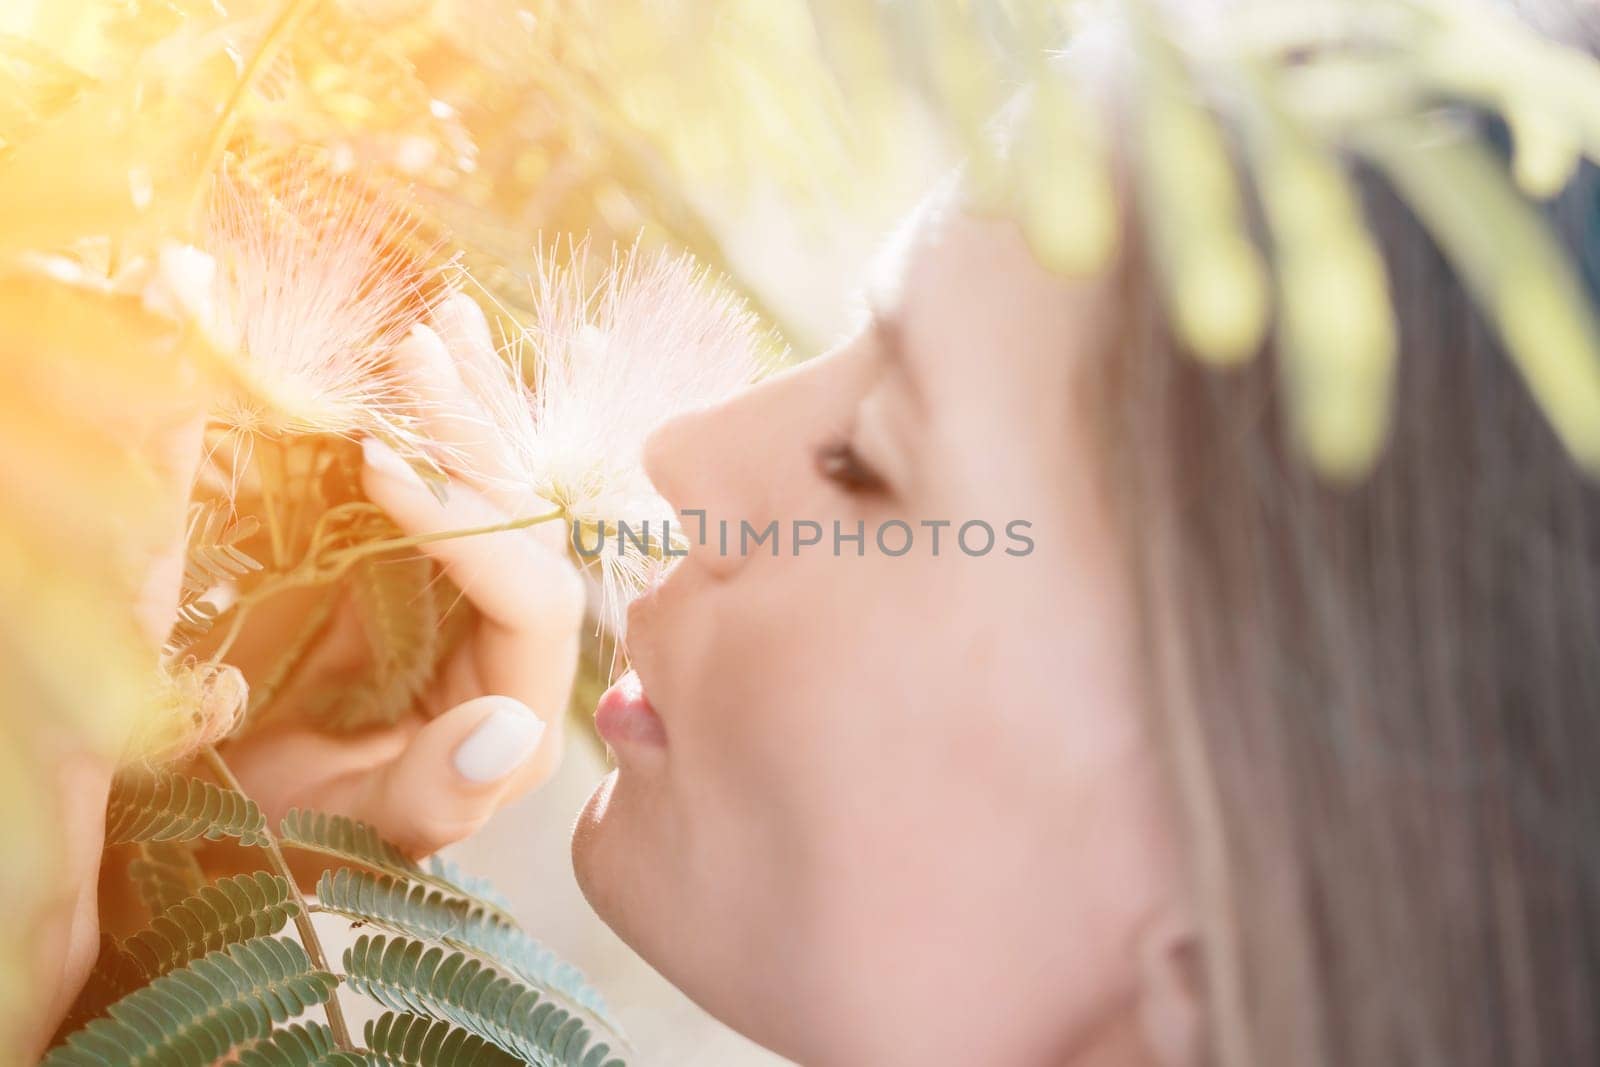 Beauty portrait of young woman closeup. Young girl smelling Chinese acacia pink blossoming flowers. Portrait of young woman in blooming spring, summer garden. Romantic vibe. Female and nature.